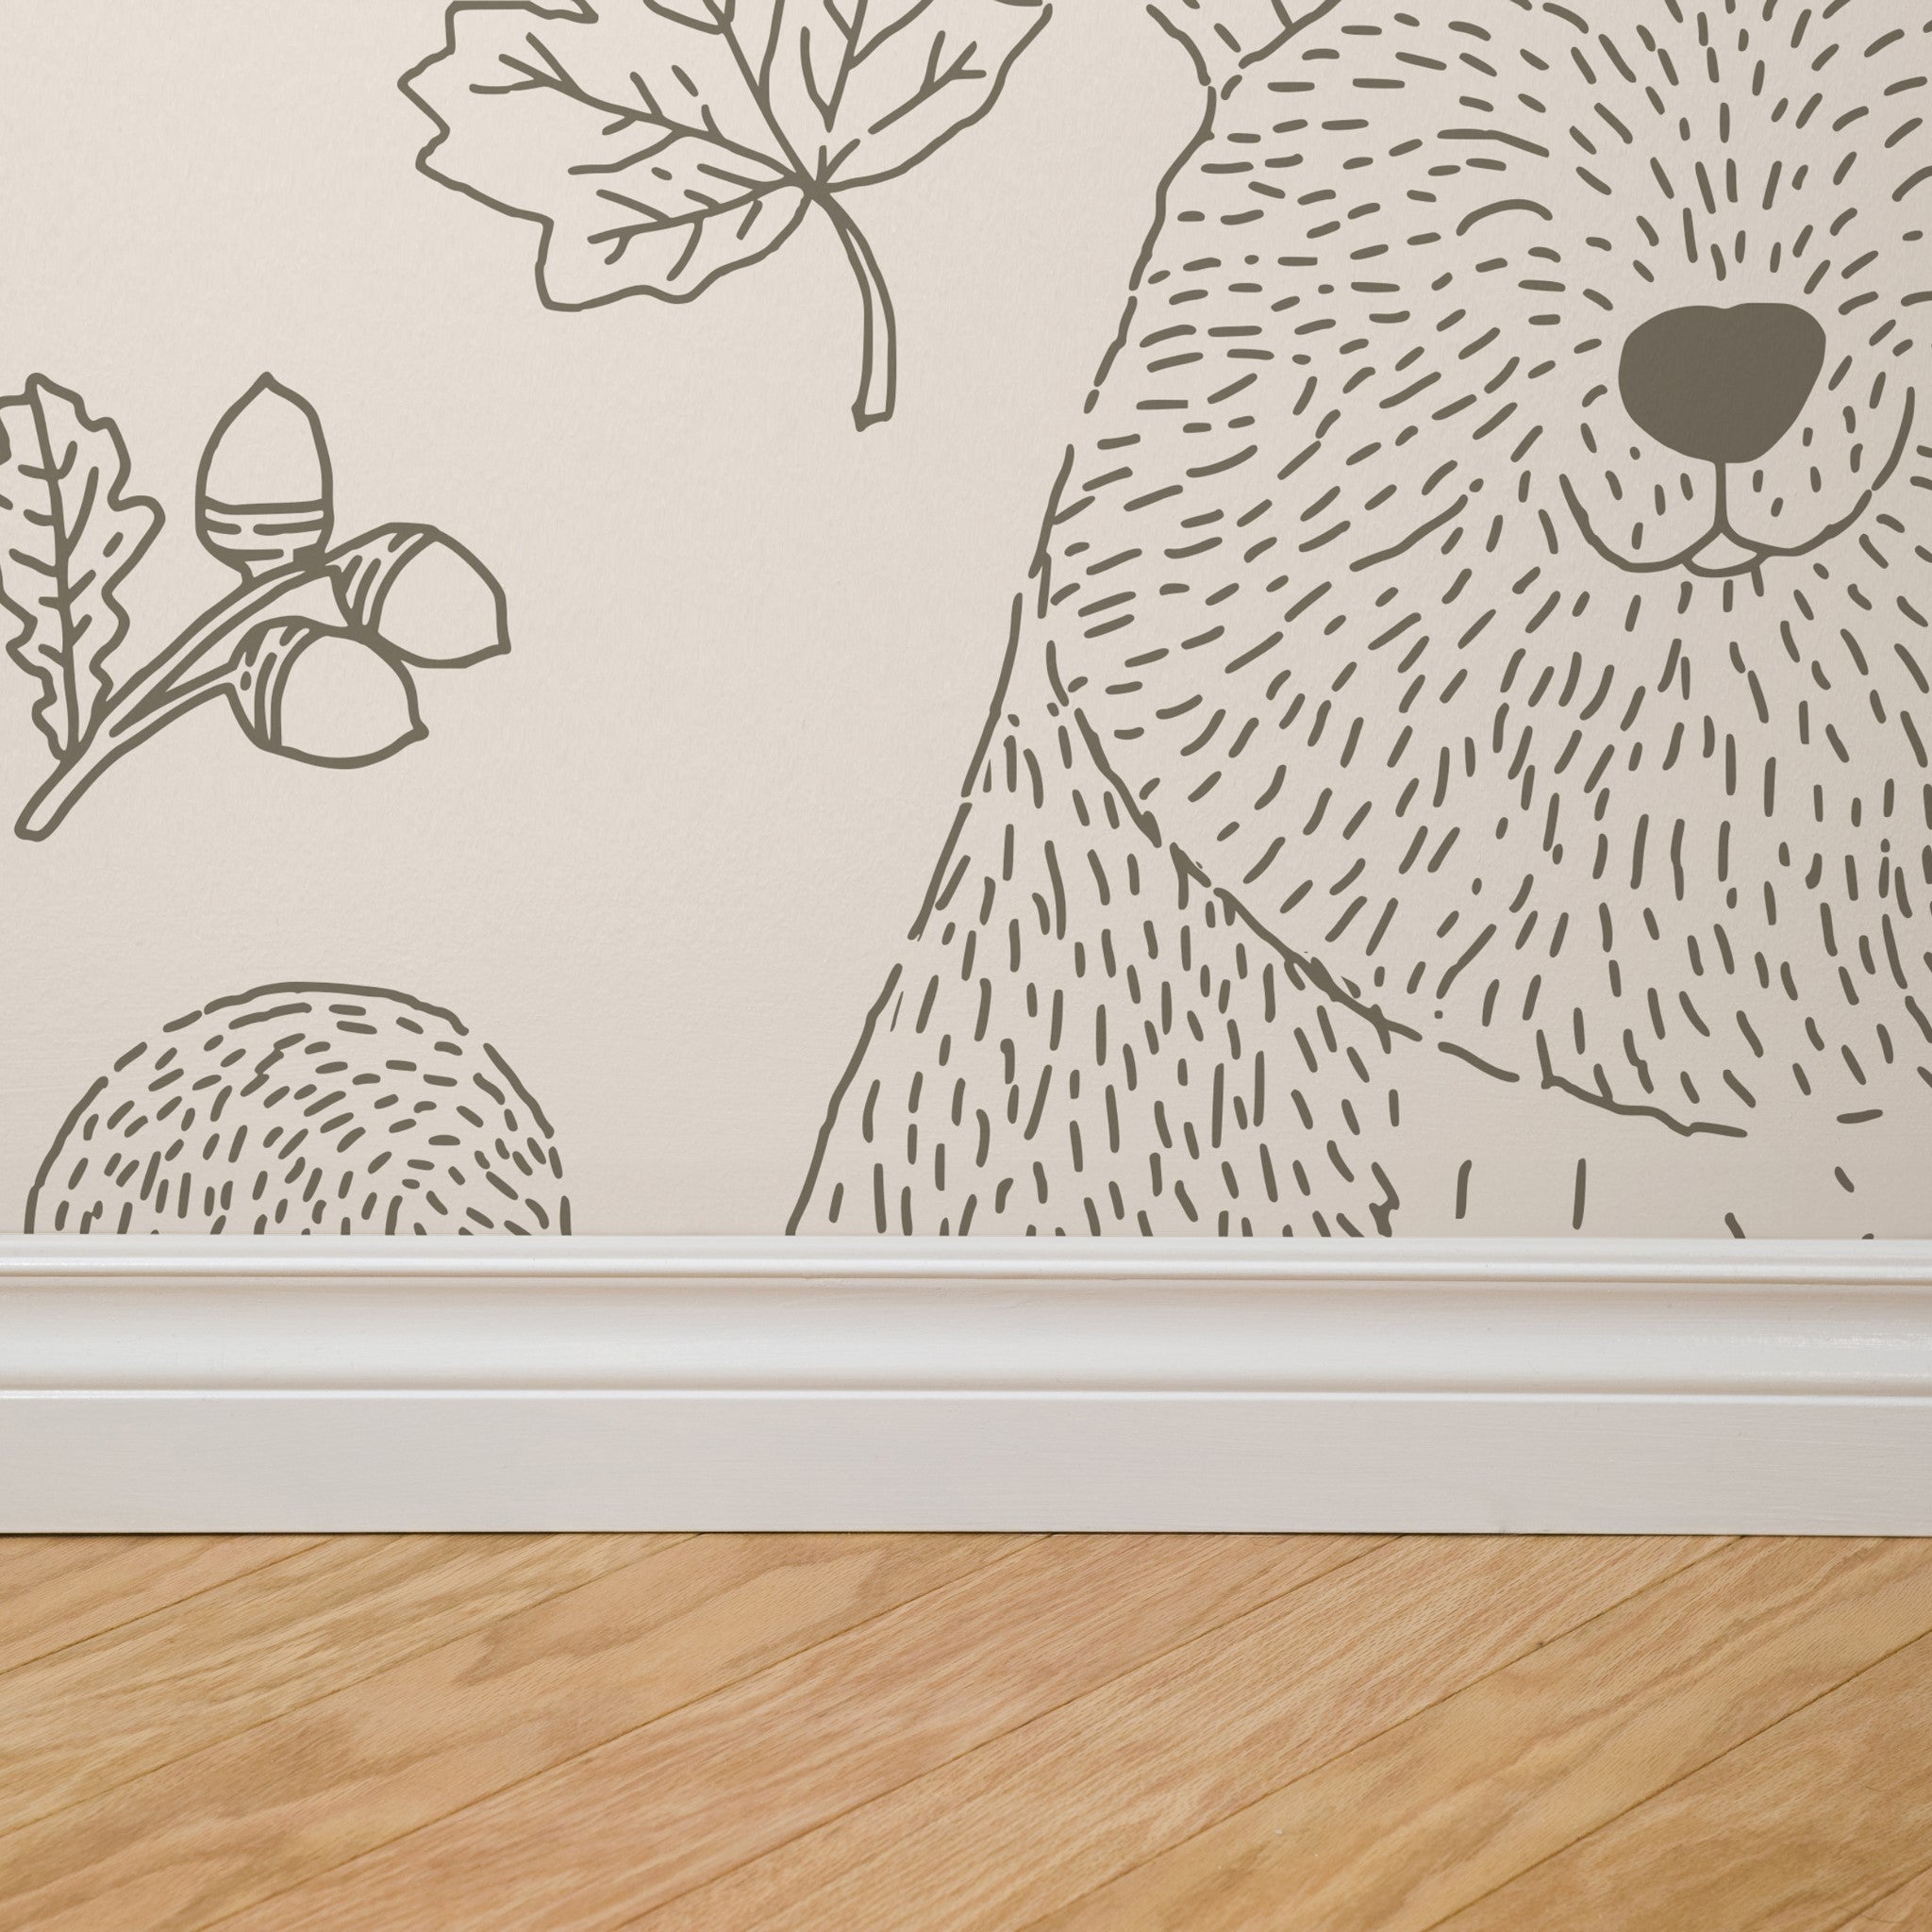 "Wall Blush Woodland (Tan) Wallpaper in a stylish home office, highlighting elegant decor and design."